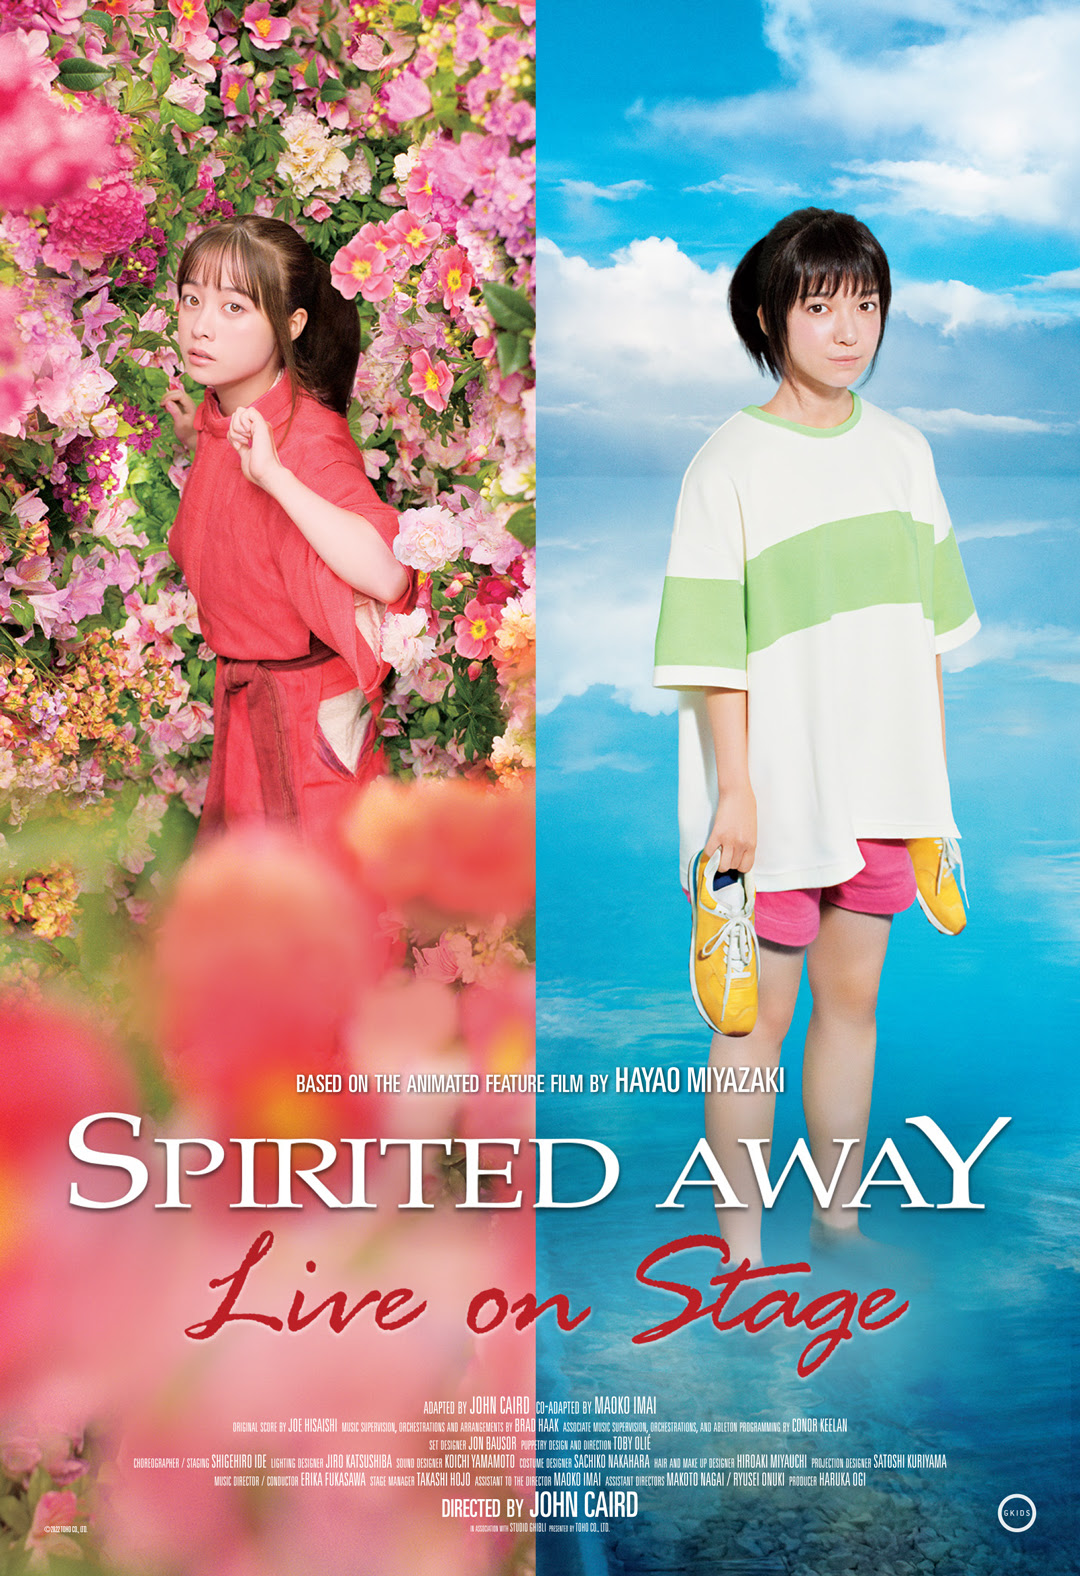 Spirited-Away-Live-on-Stage GKIDS Acquires North American Distribution Rights ﻿To Filmed Performances of Spirited Away: Live on Stage